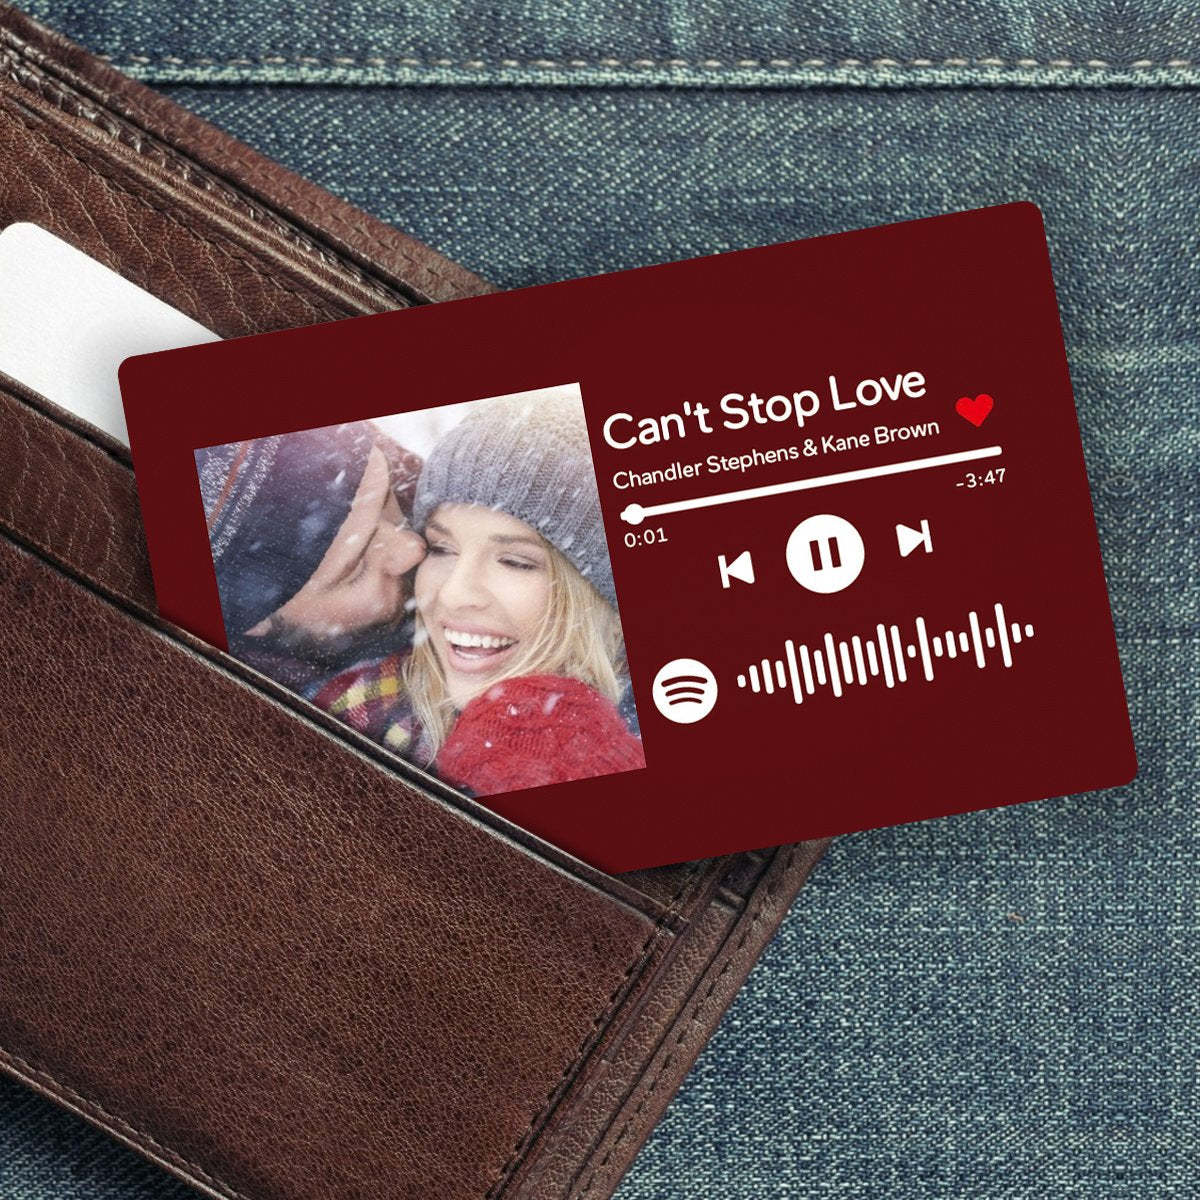 Scannable Spotify Code Photo Wallet Insert Card Gifts